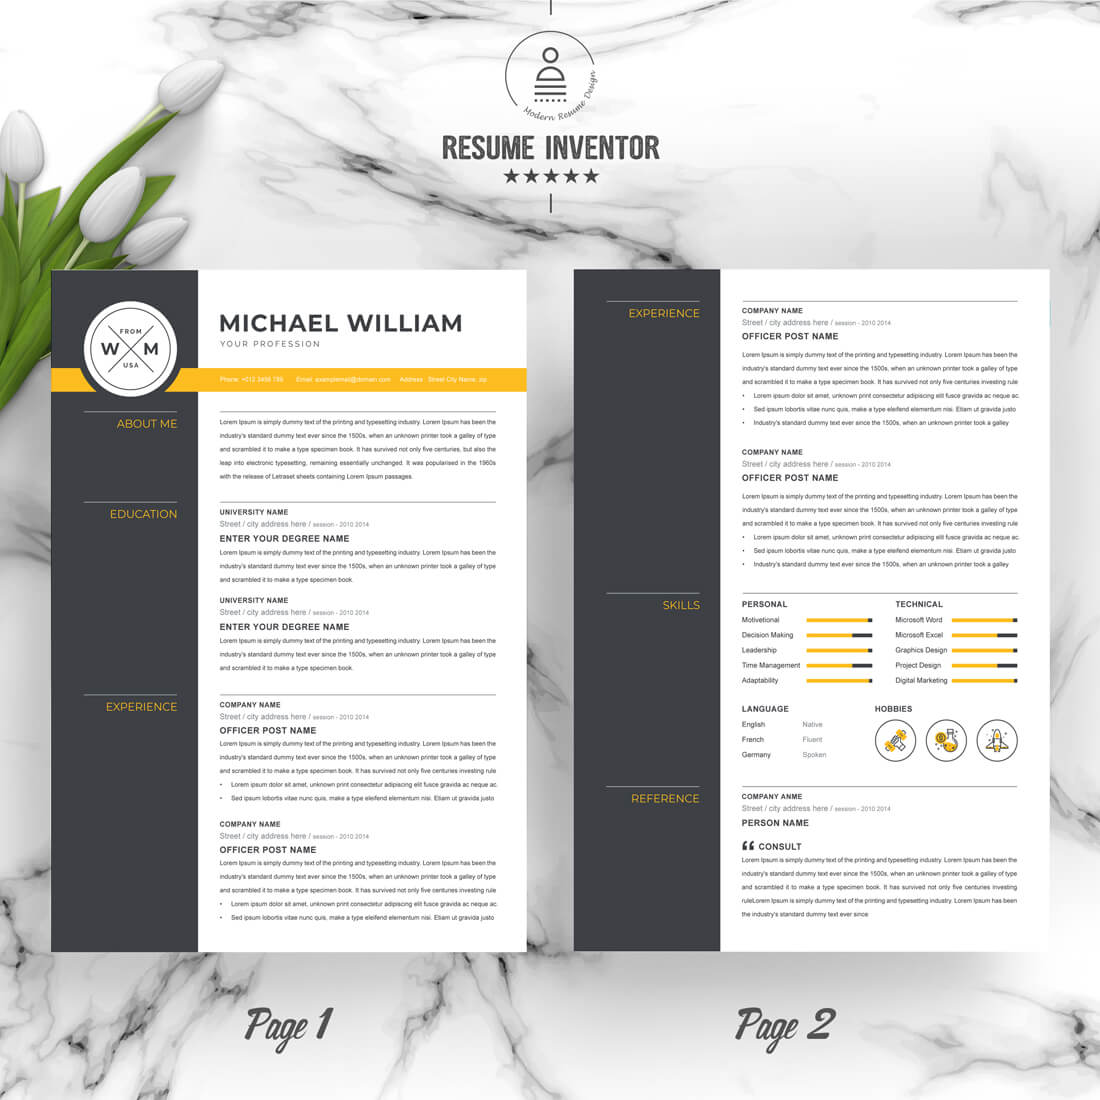 Professional Resume & CV Design Template | CV Template | EPS, PSD, INDD, DOCX & PAGES Format preview image.